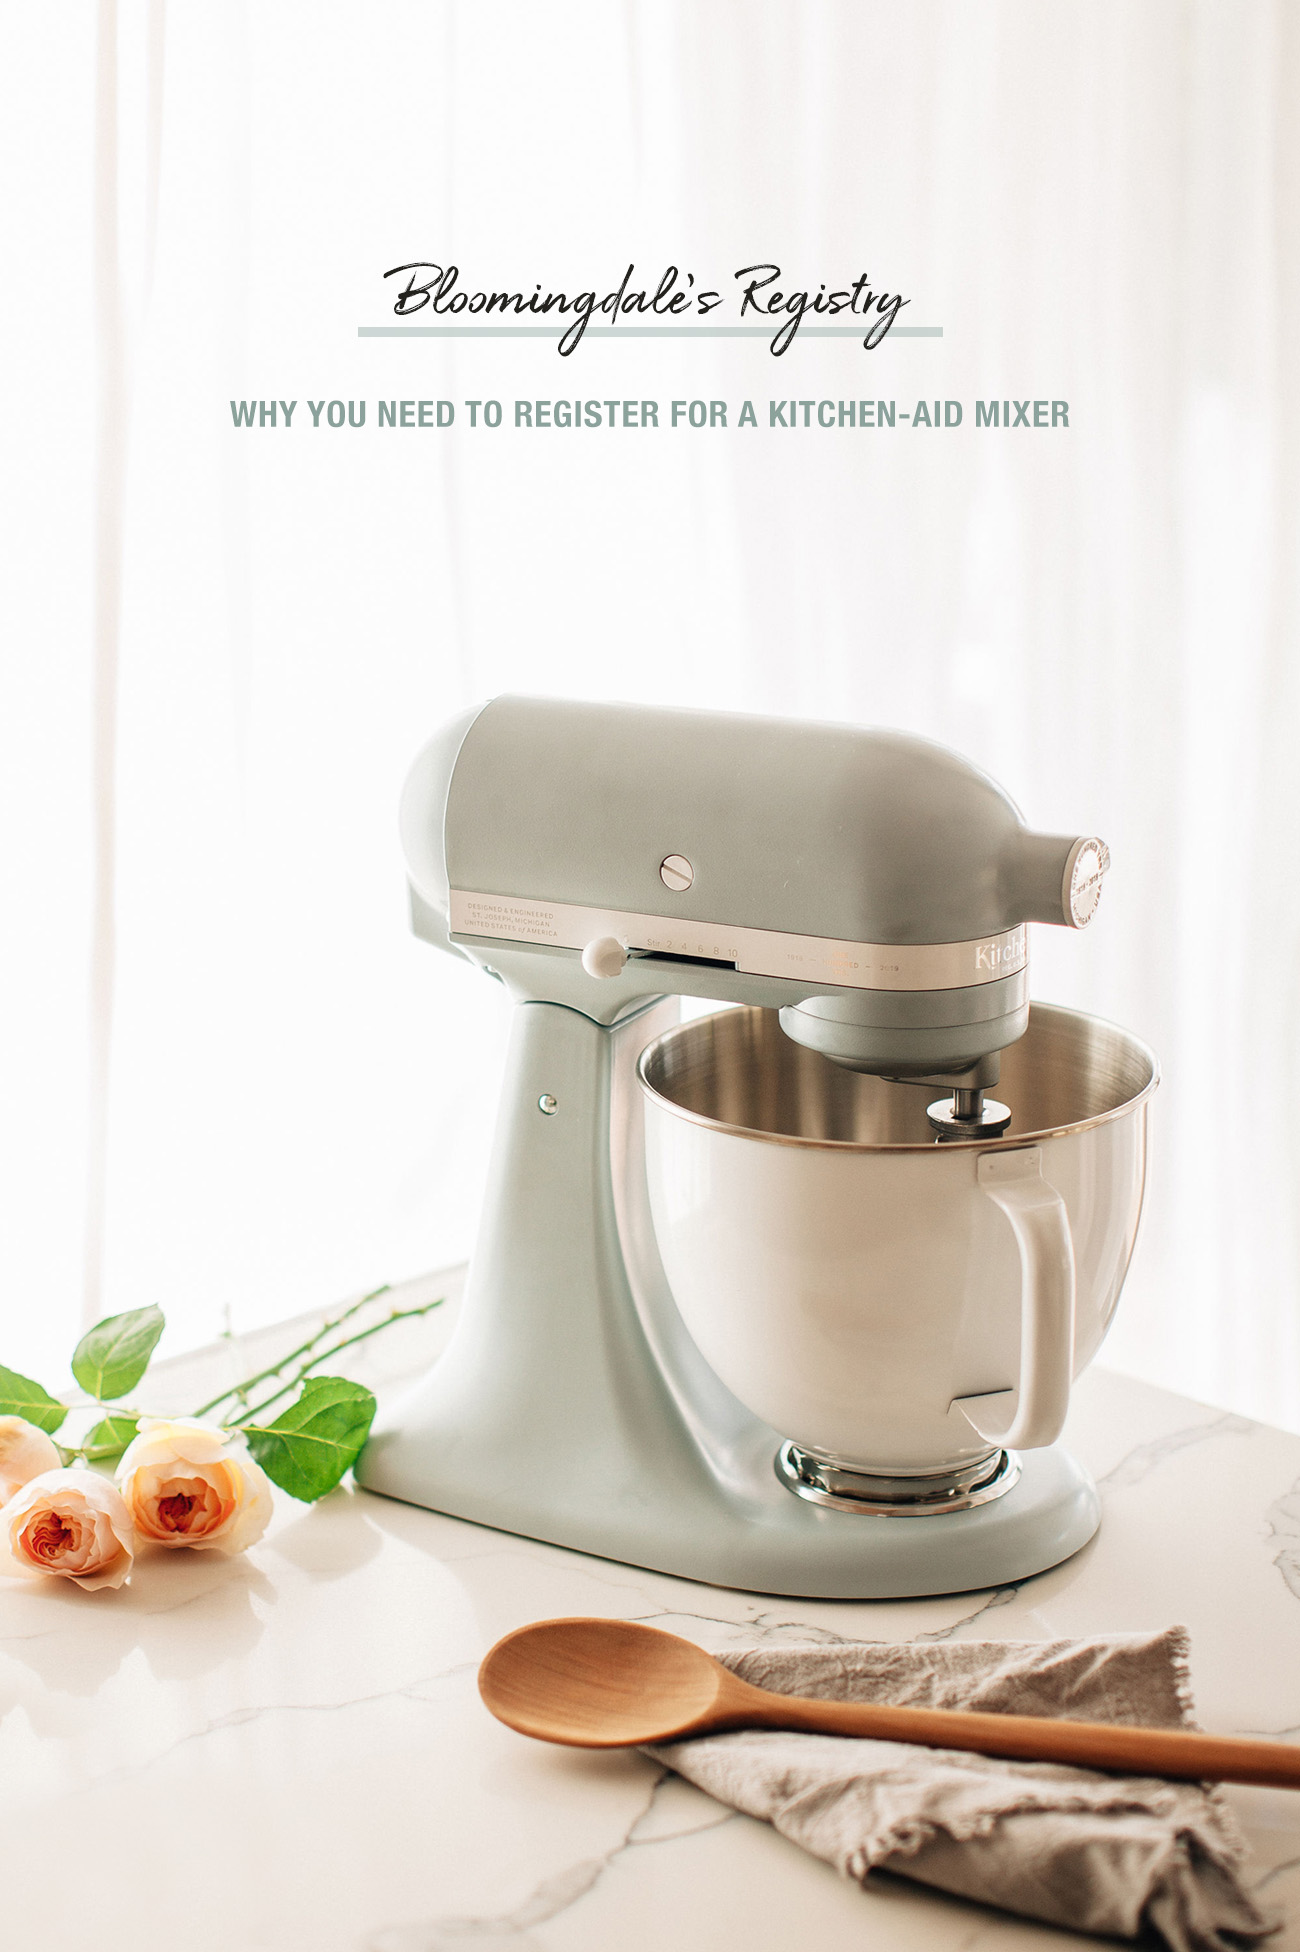 Bloomingdale's Registry Why You Should Register for a Kitchen-Aid Mixer